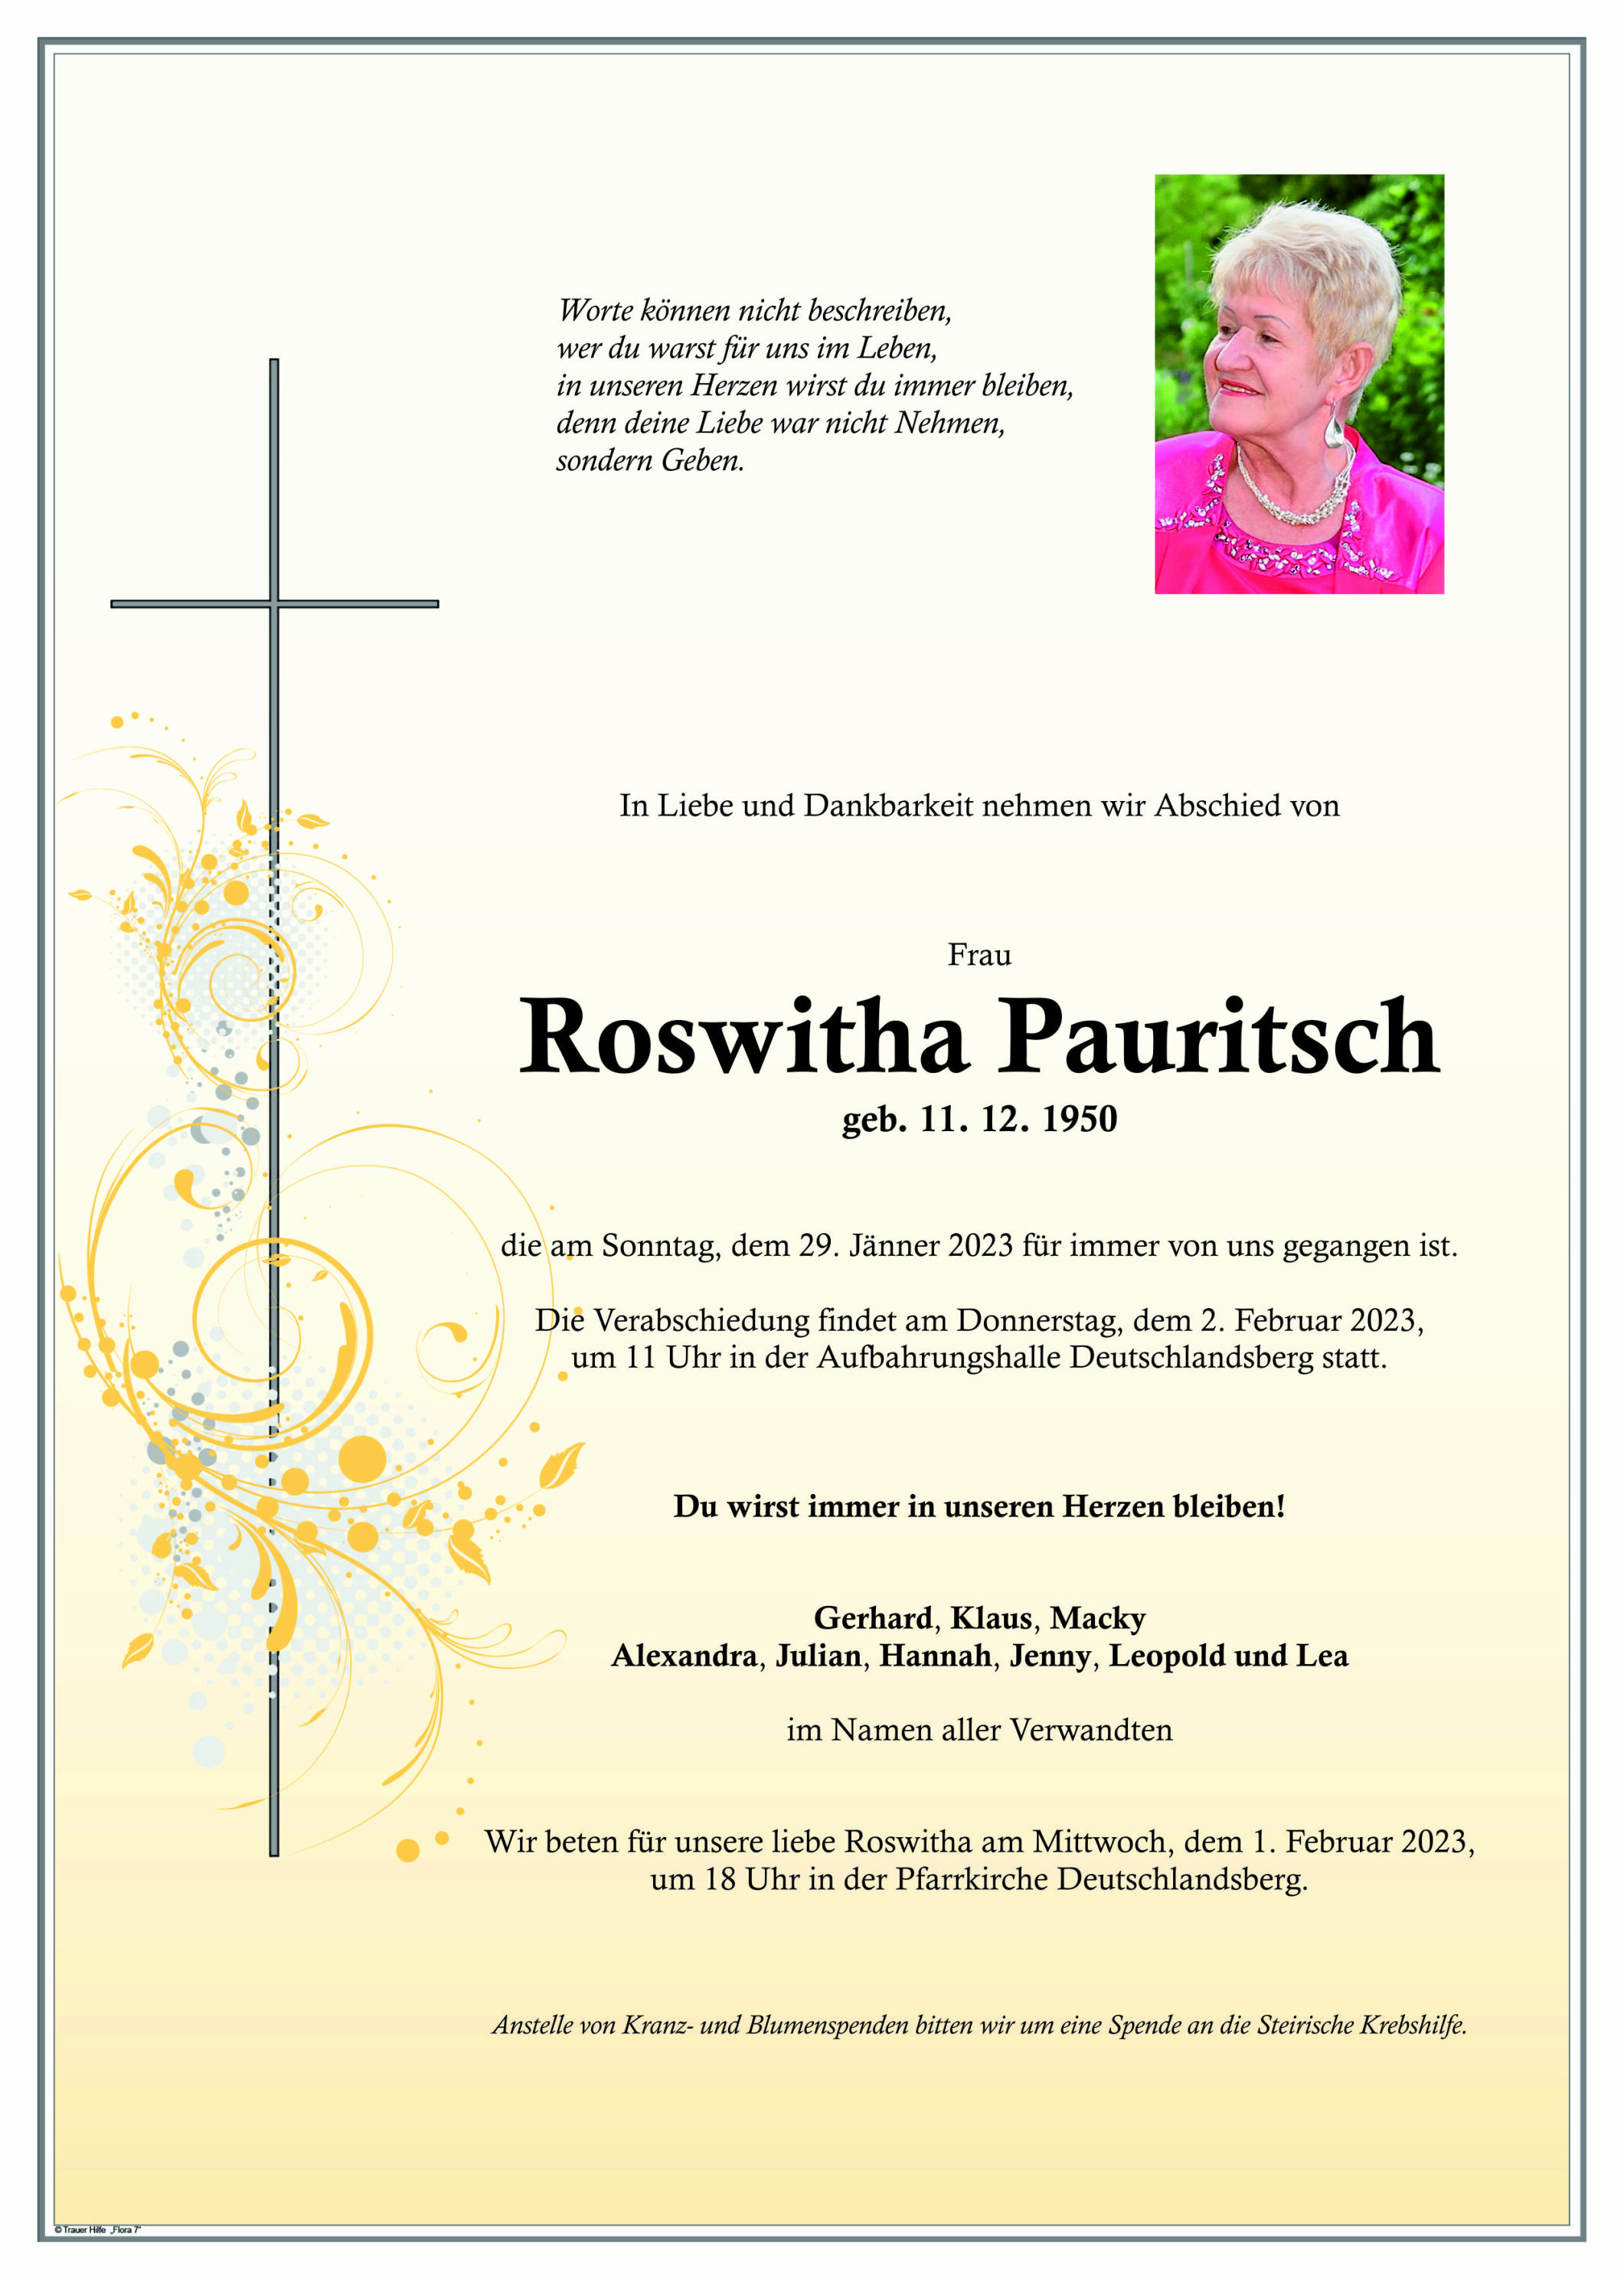 Roswitha Pauritsch